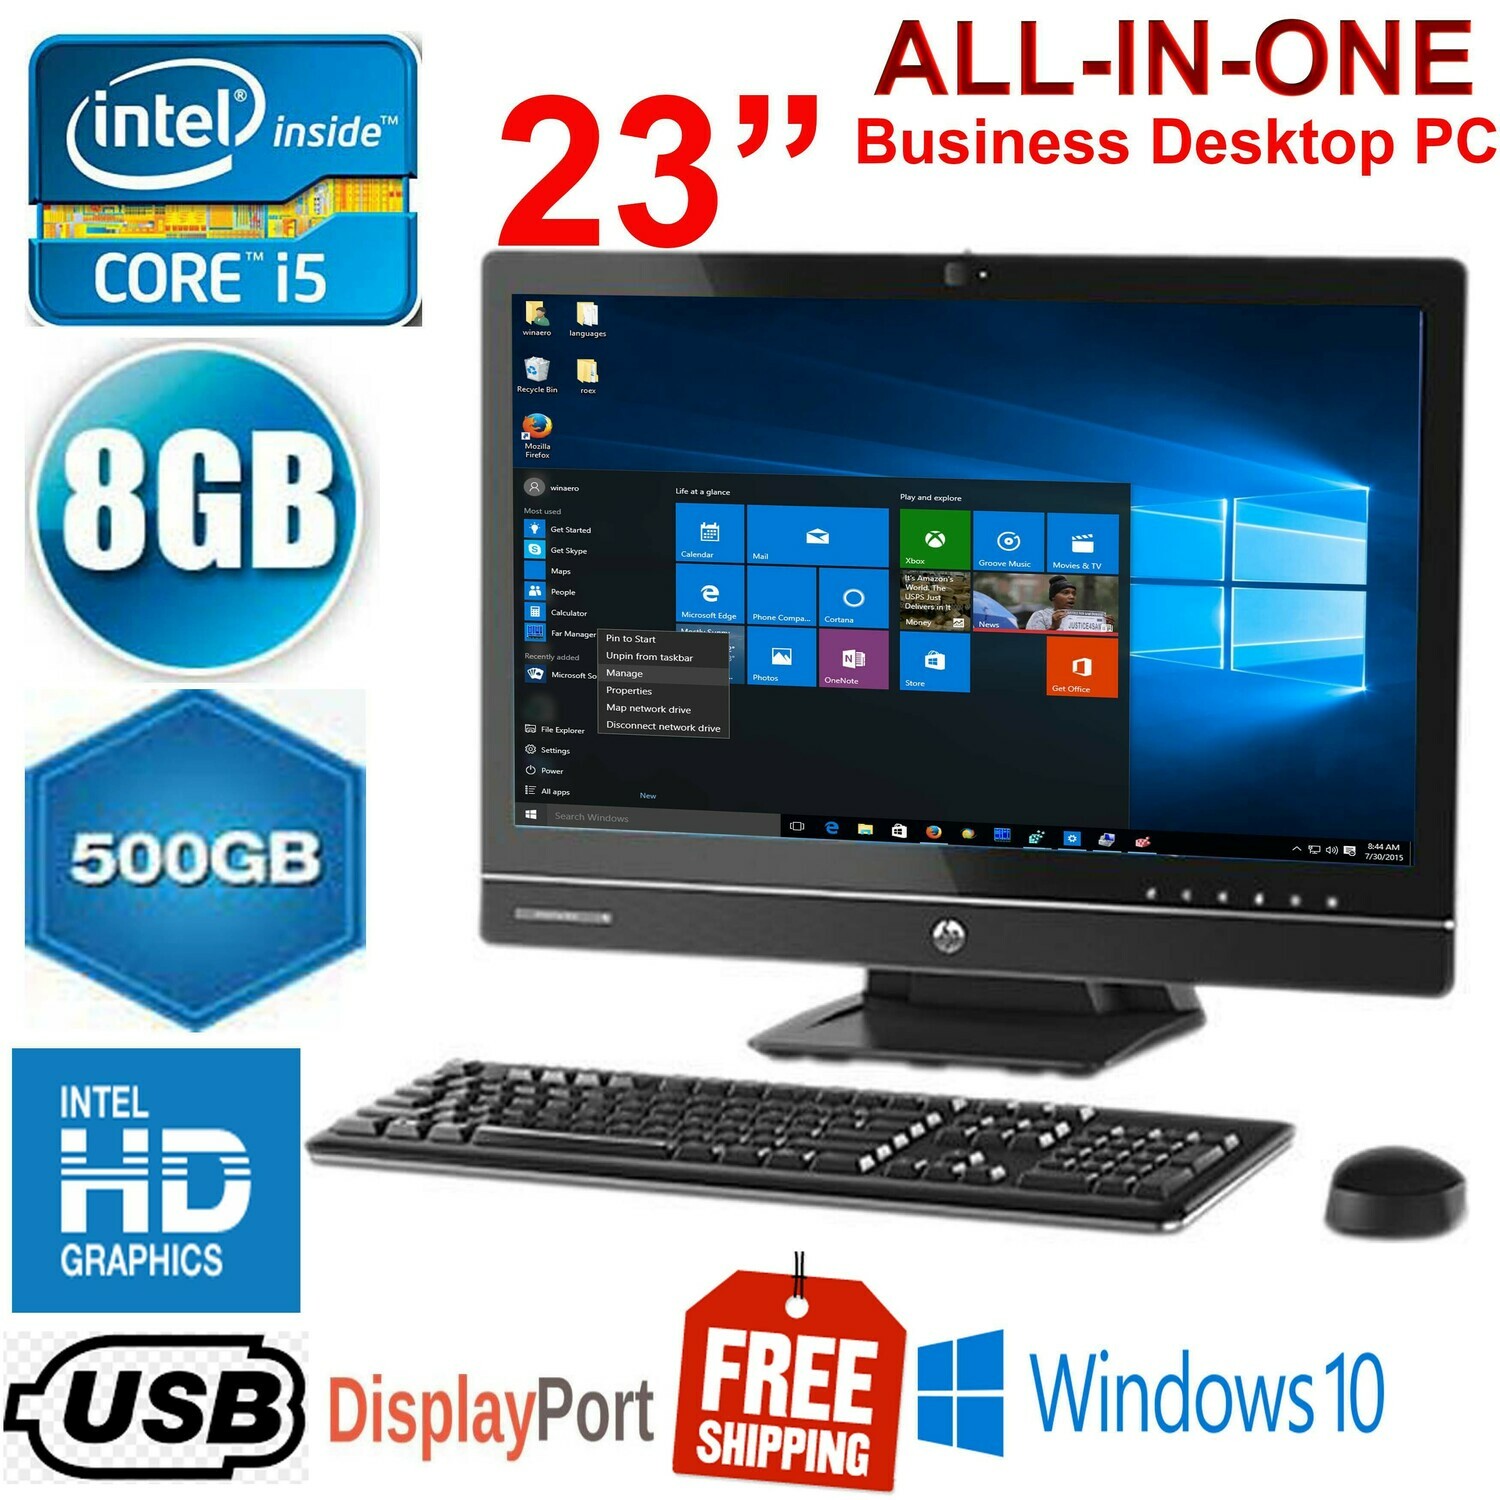 HP EliteOne 800 G1 All-in-One Desktop PC- Intel Core i5 (3.0 GHz) 8 GB 500 GB HDD 23" HD Graphics Win10